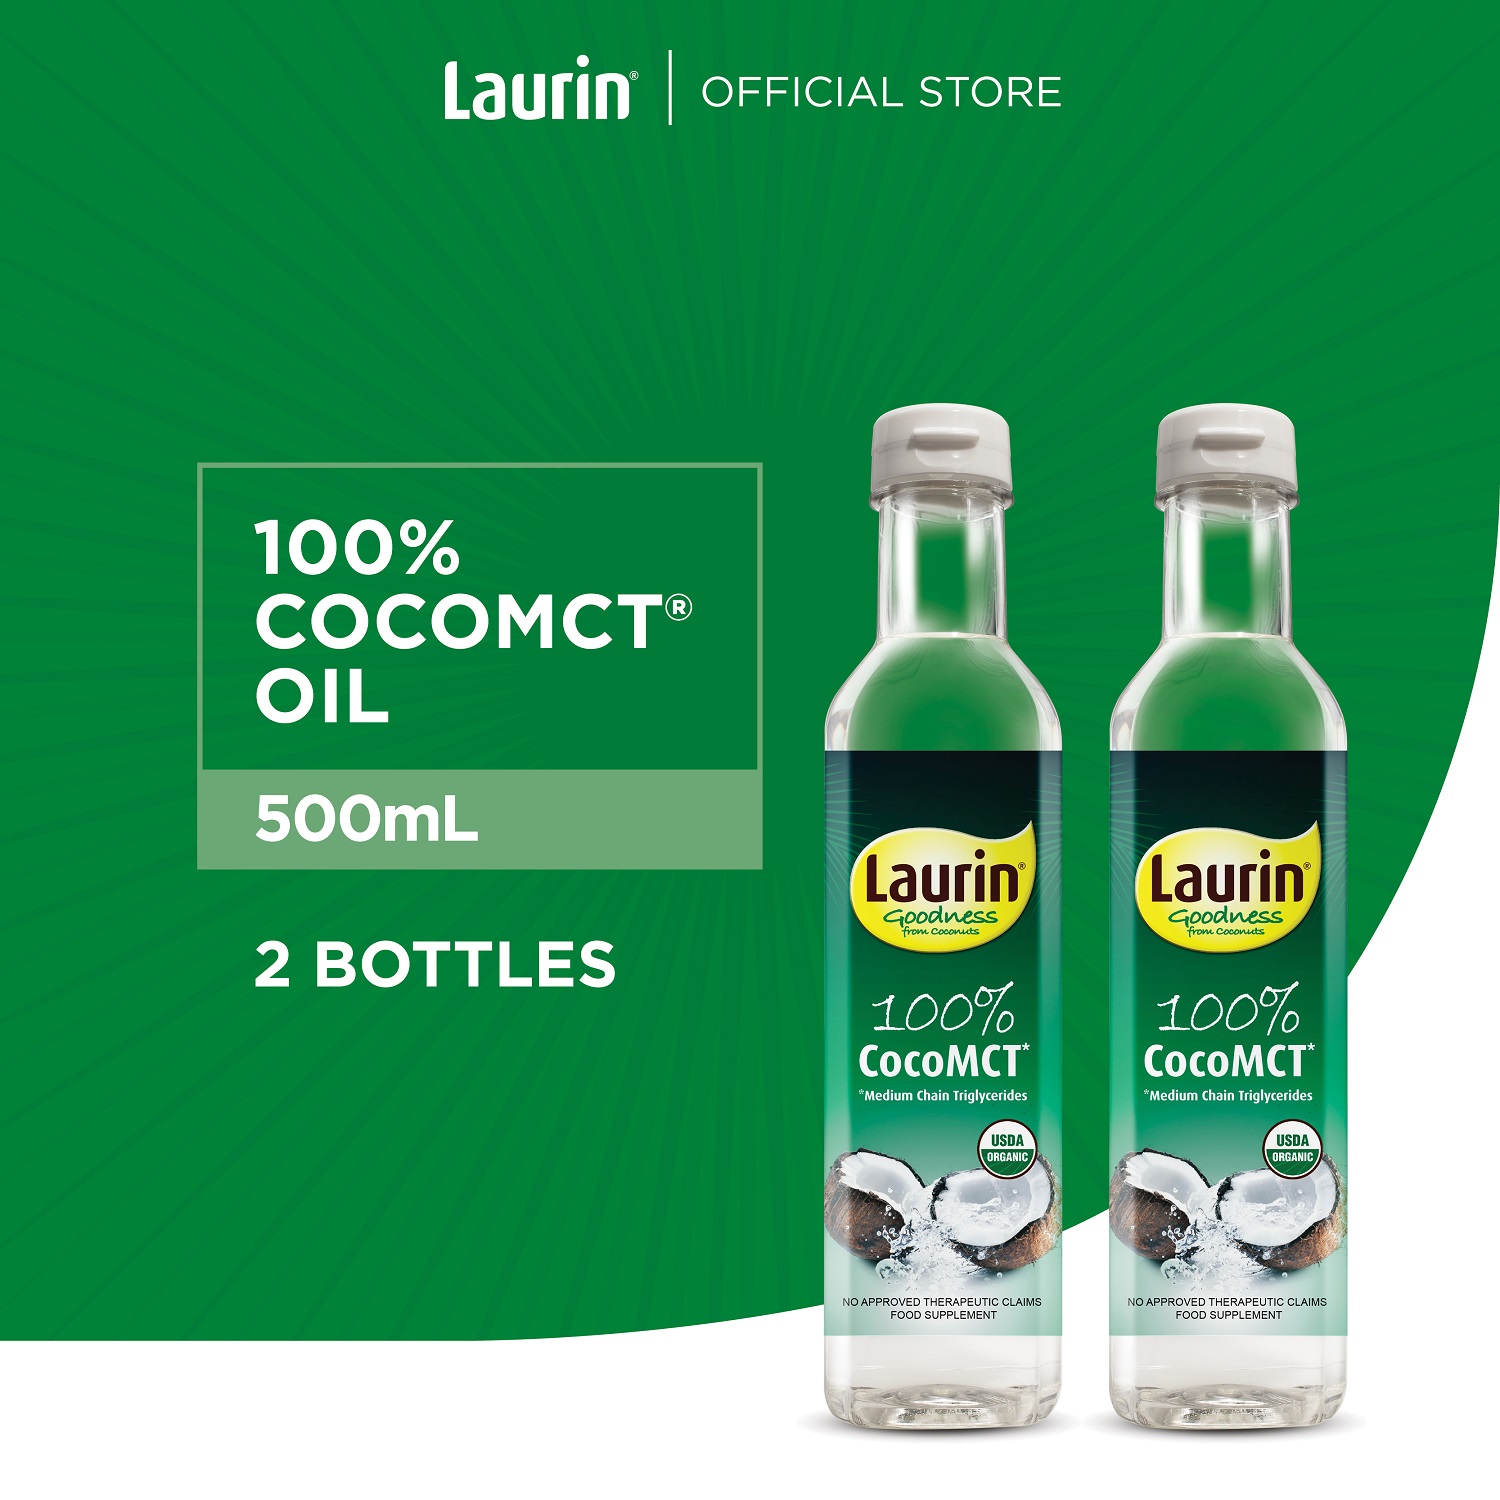 Laurin 100% Coco MCT Oil from Coconut Oil 500mL (2 bottles) Lazada PH